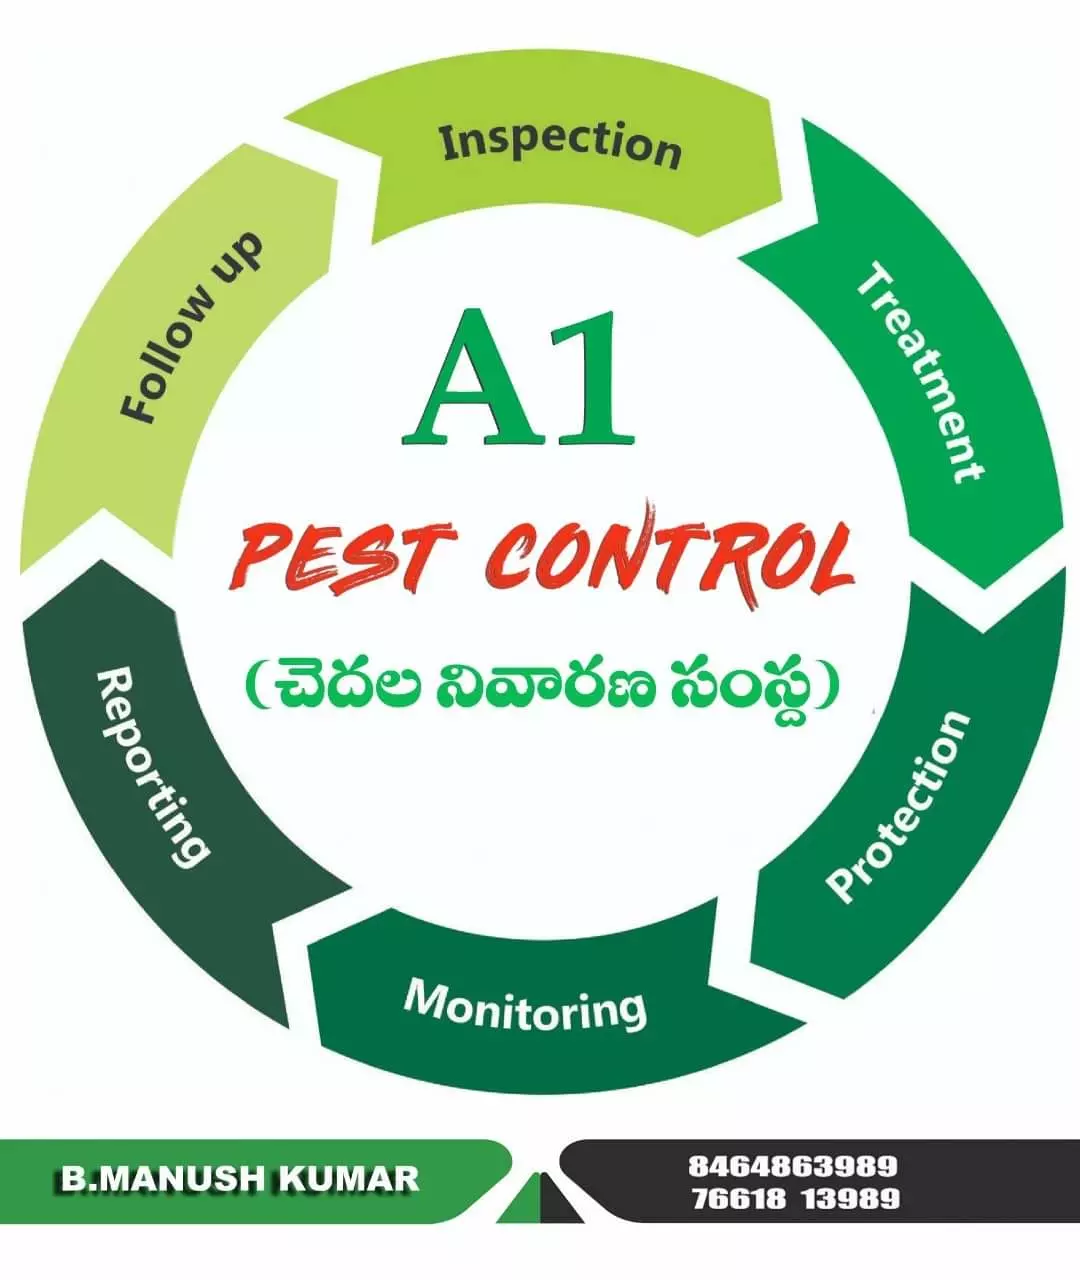 a1 pest control services near kurnool road in ongole - Photo No.13